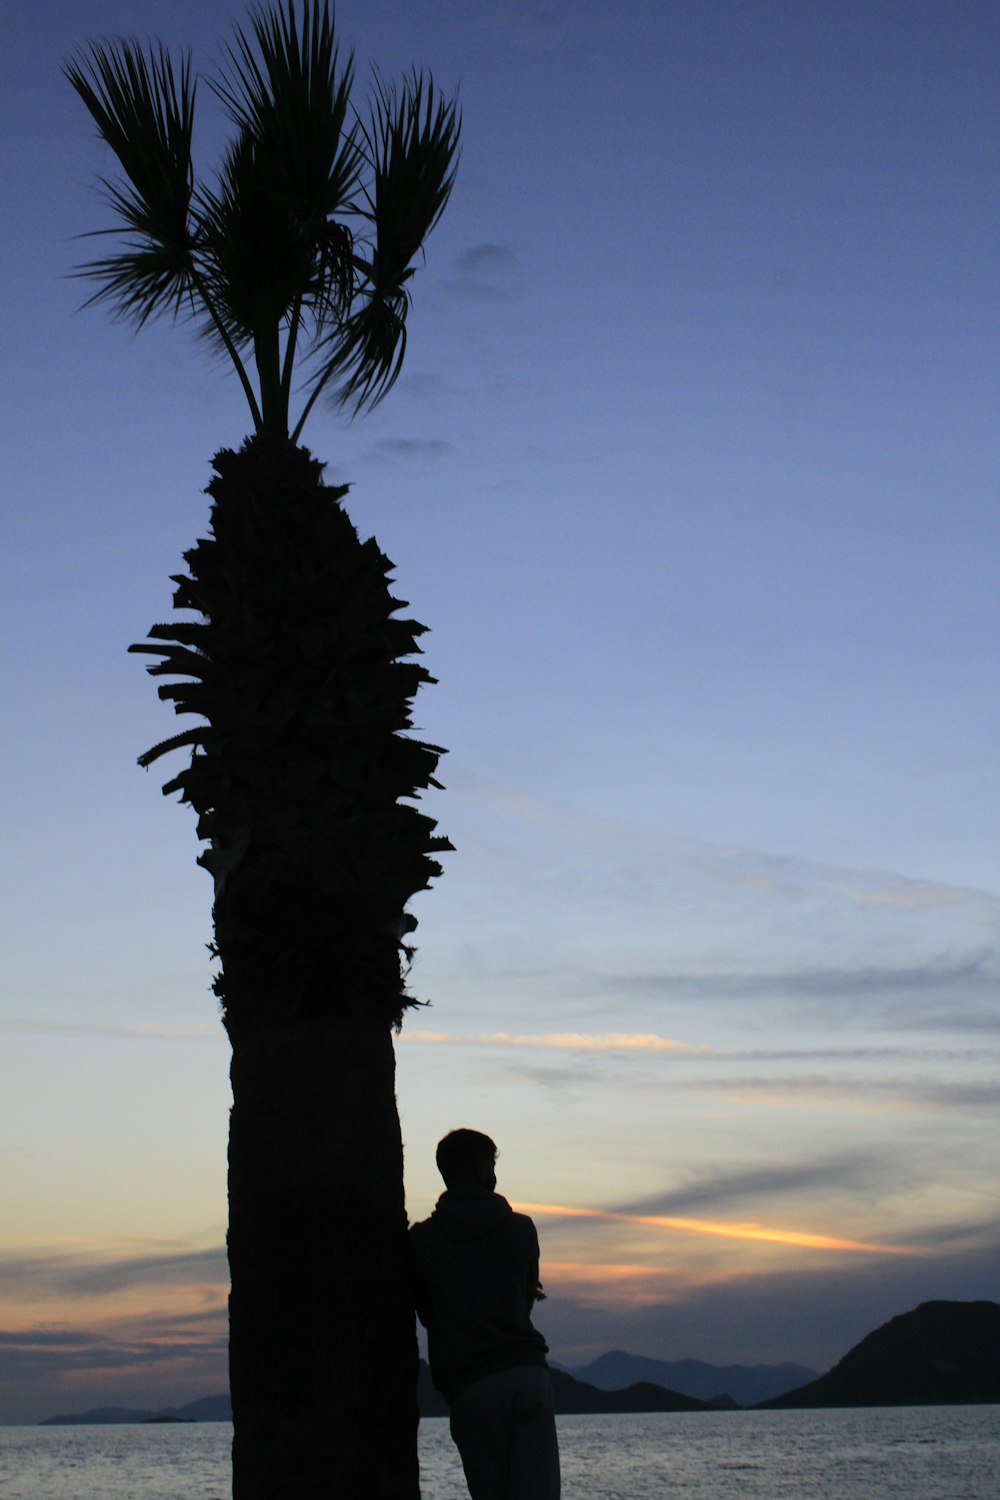 a man standing next to a palm tree near the ocean